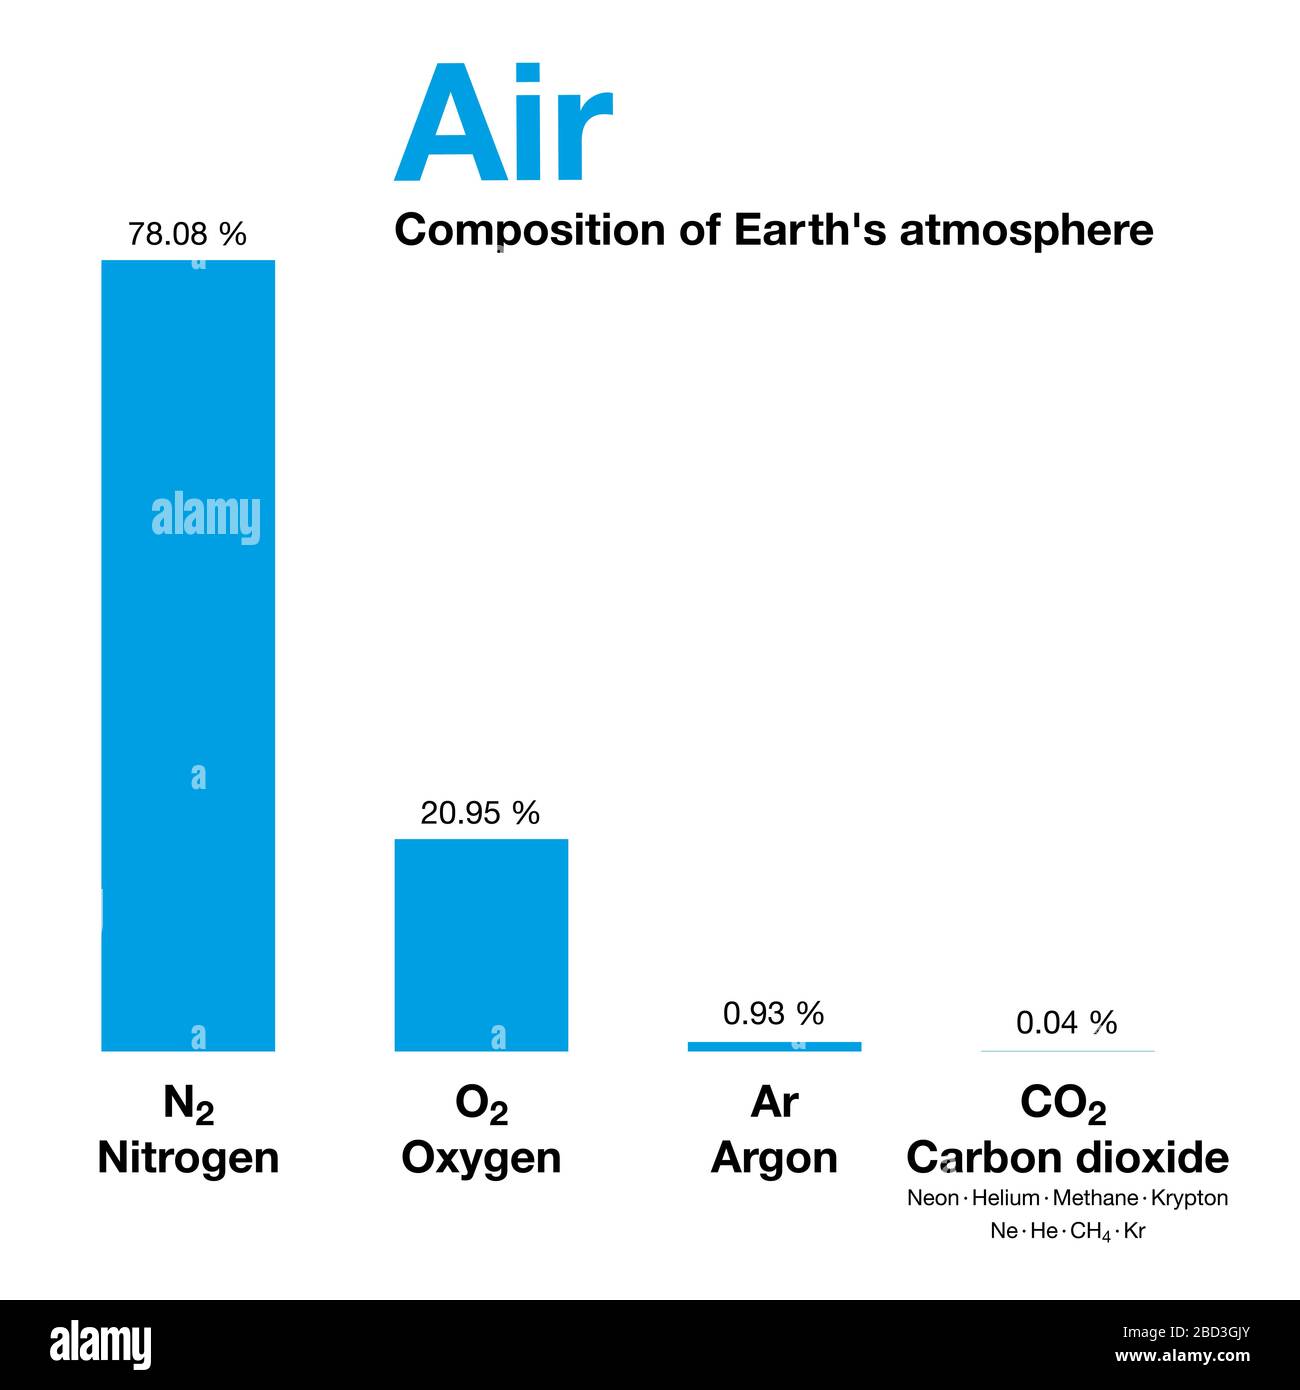 Air, composition of Earth's atmosphere by volume, excluding water vapor. Dry air contains nitrogen, oxygen, argon, carbon dioxide and other gases. Stock Photo